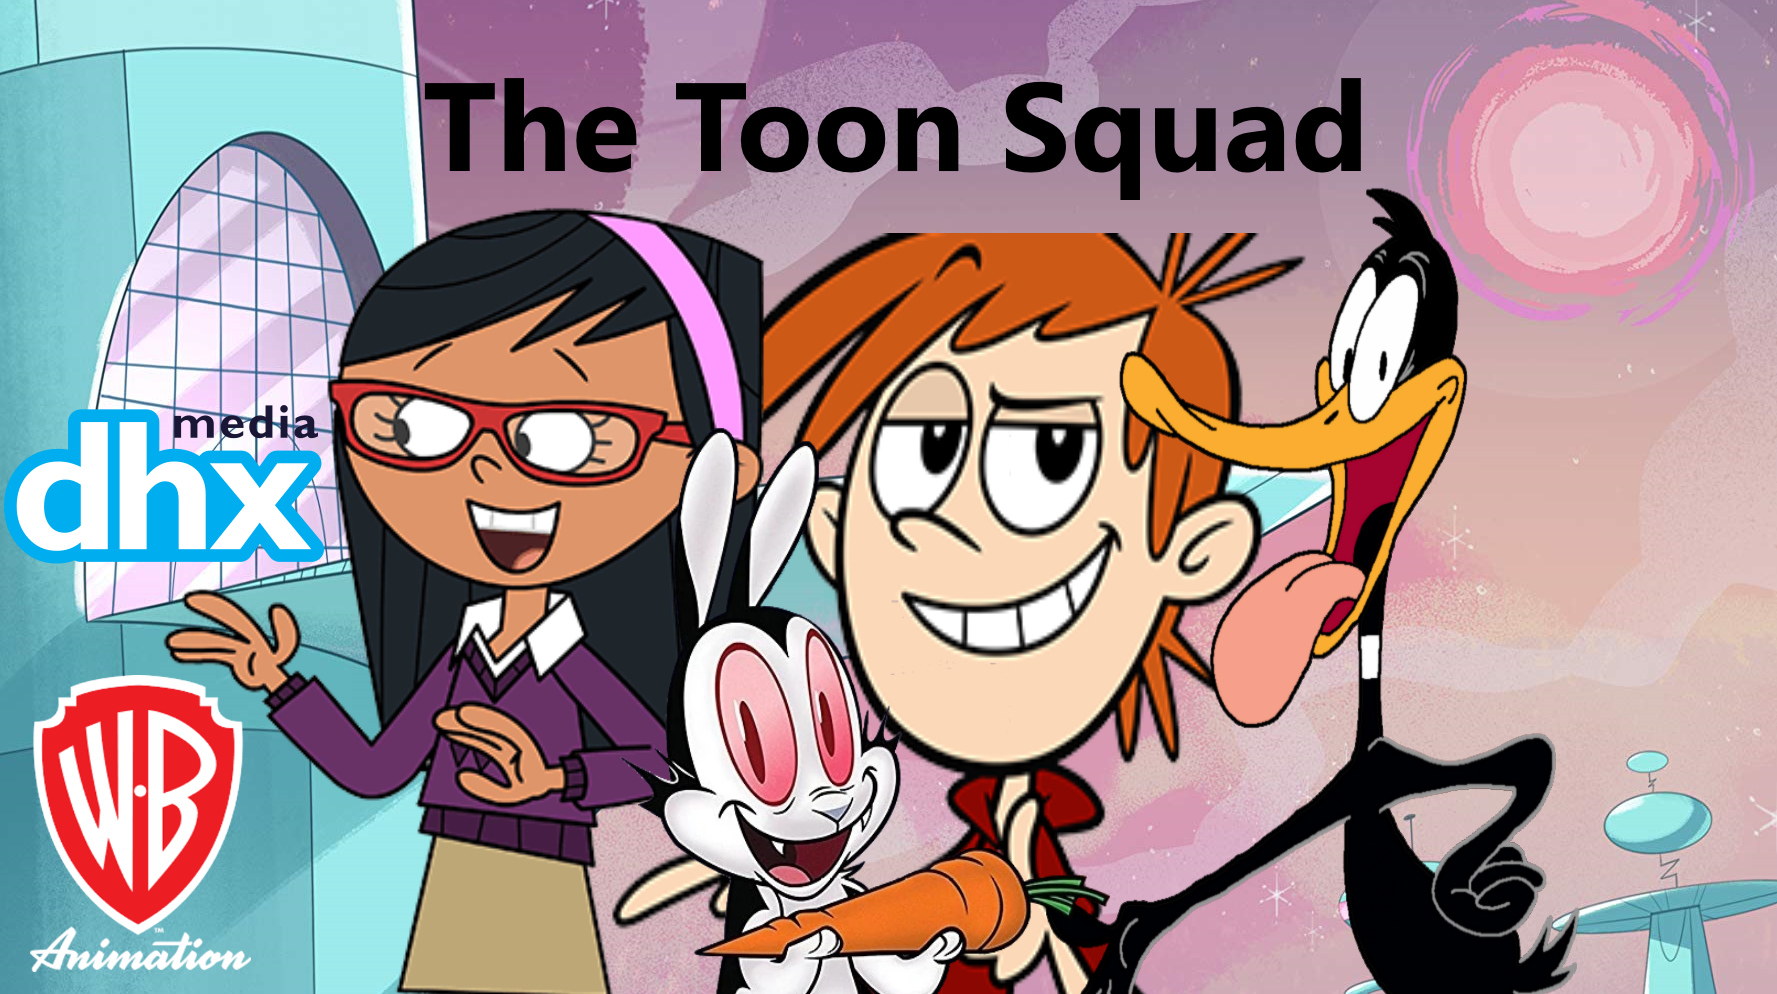 https://static.wikia.nocookie.net/the-toon-squad/images/7/7c/The_Toon_Squad_Poster.png/revision/latest?cb=20190529130926